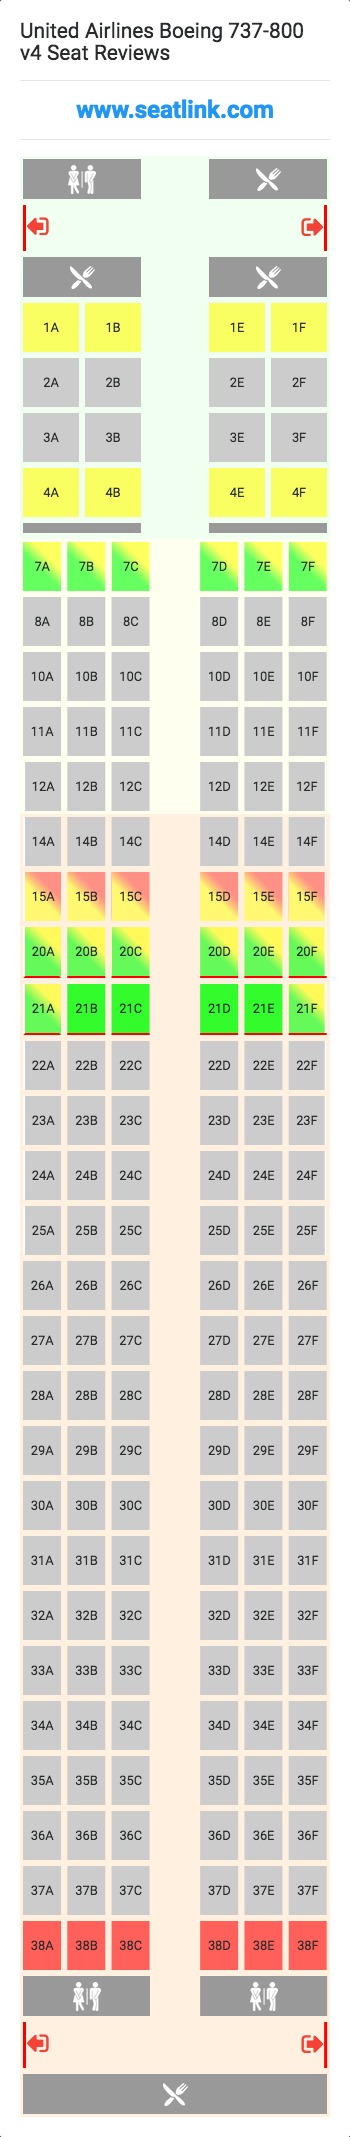 United Airlines Boeing 737-800 v4 (738) Seat Map